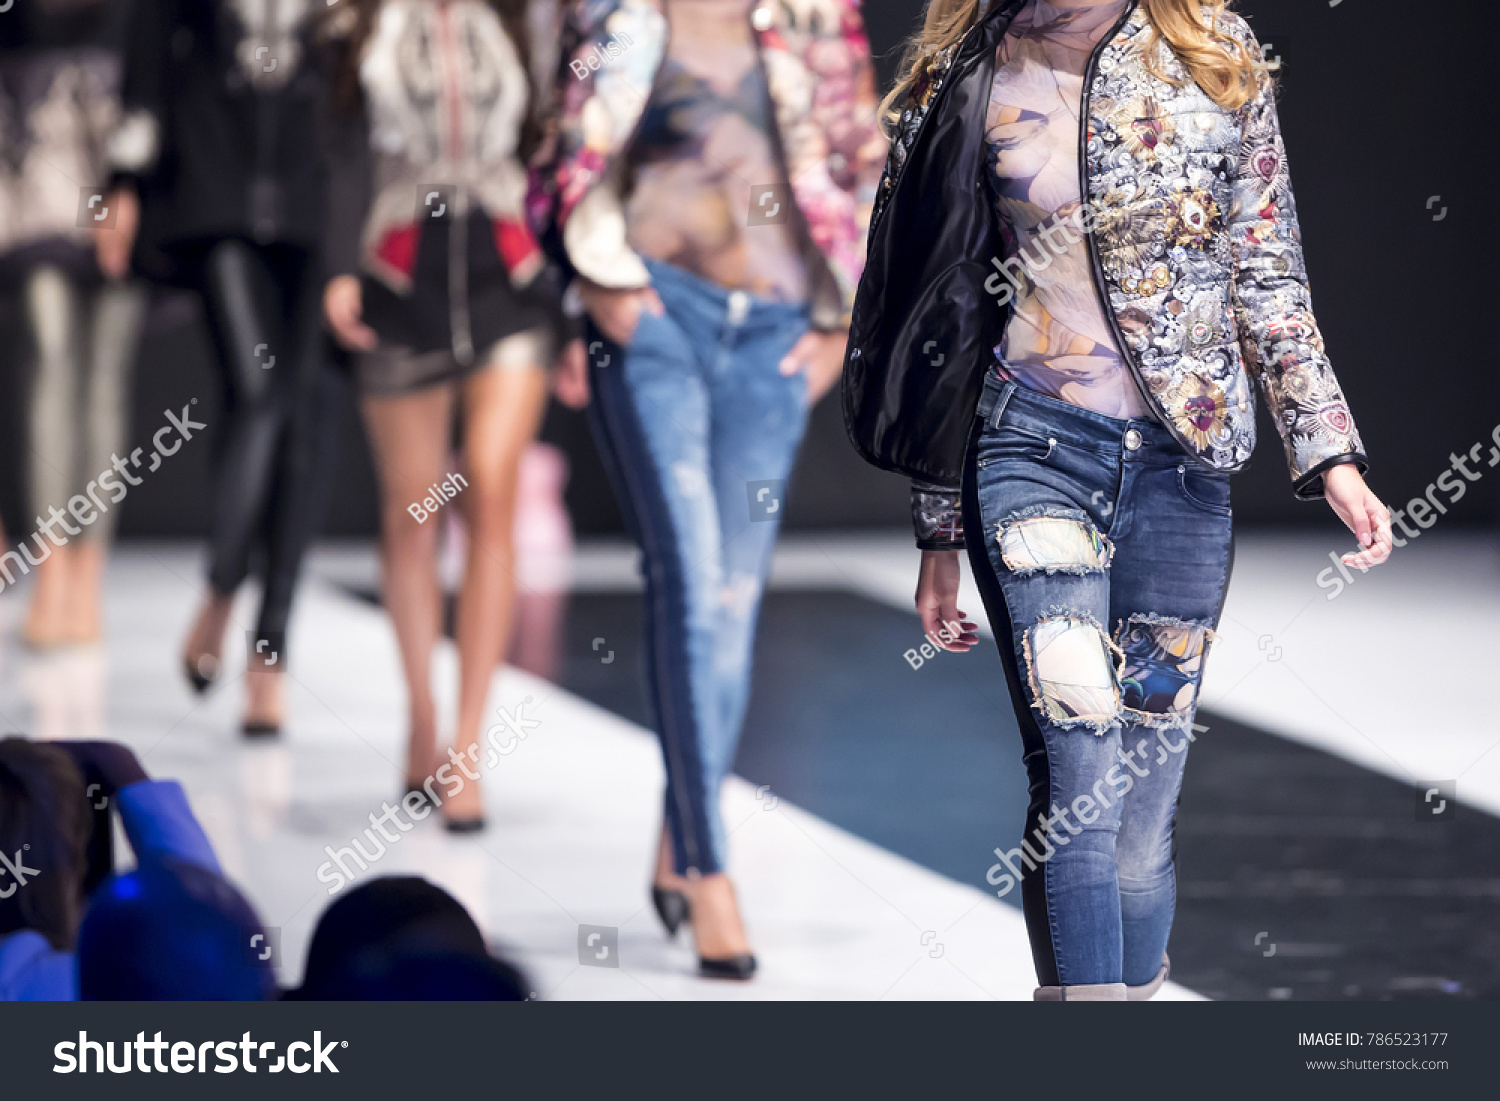 Female models walk the runway in different dresses during a Fashion Show. Fashion catwalk event showing new collection of clothes. In a row. #786523177